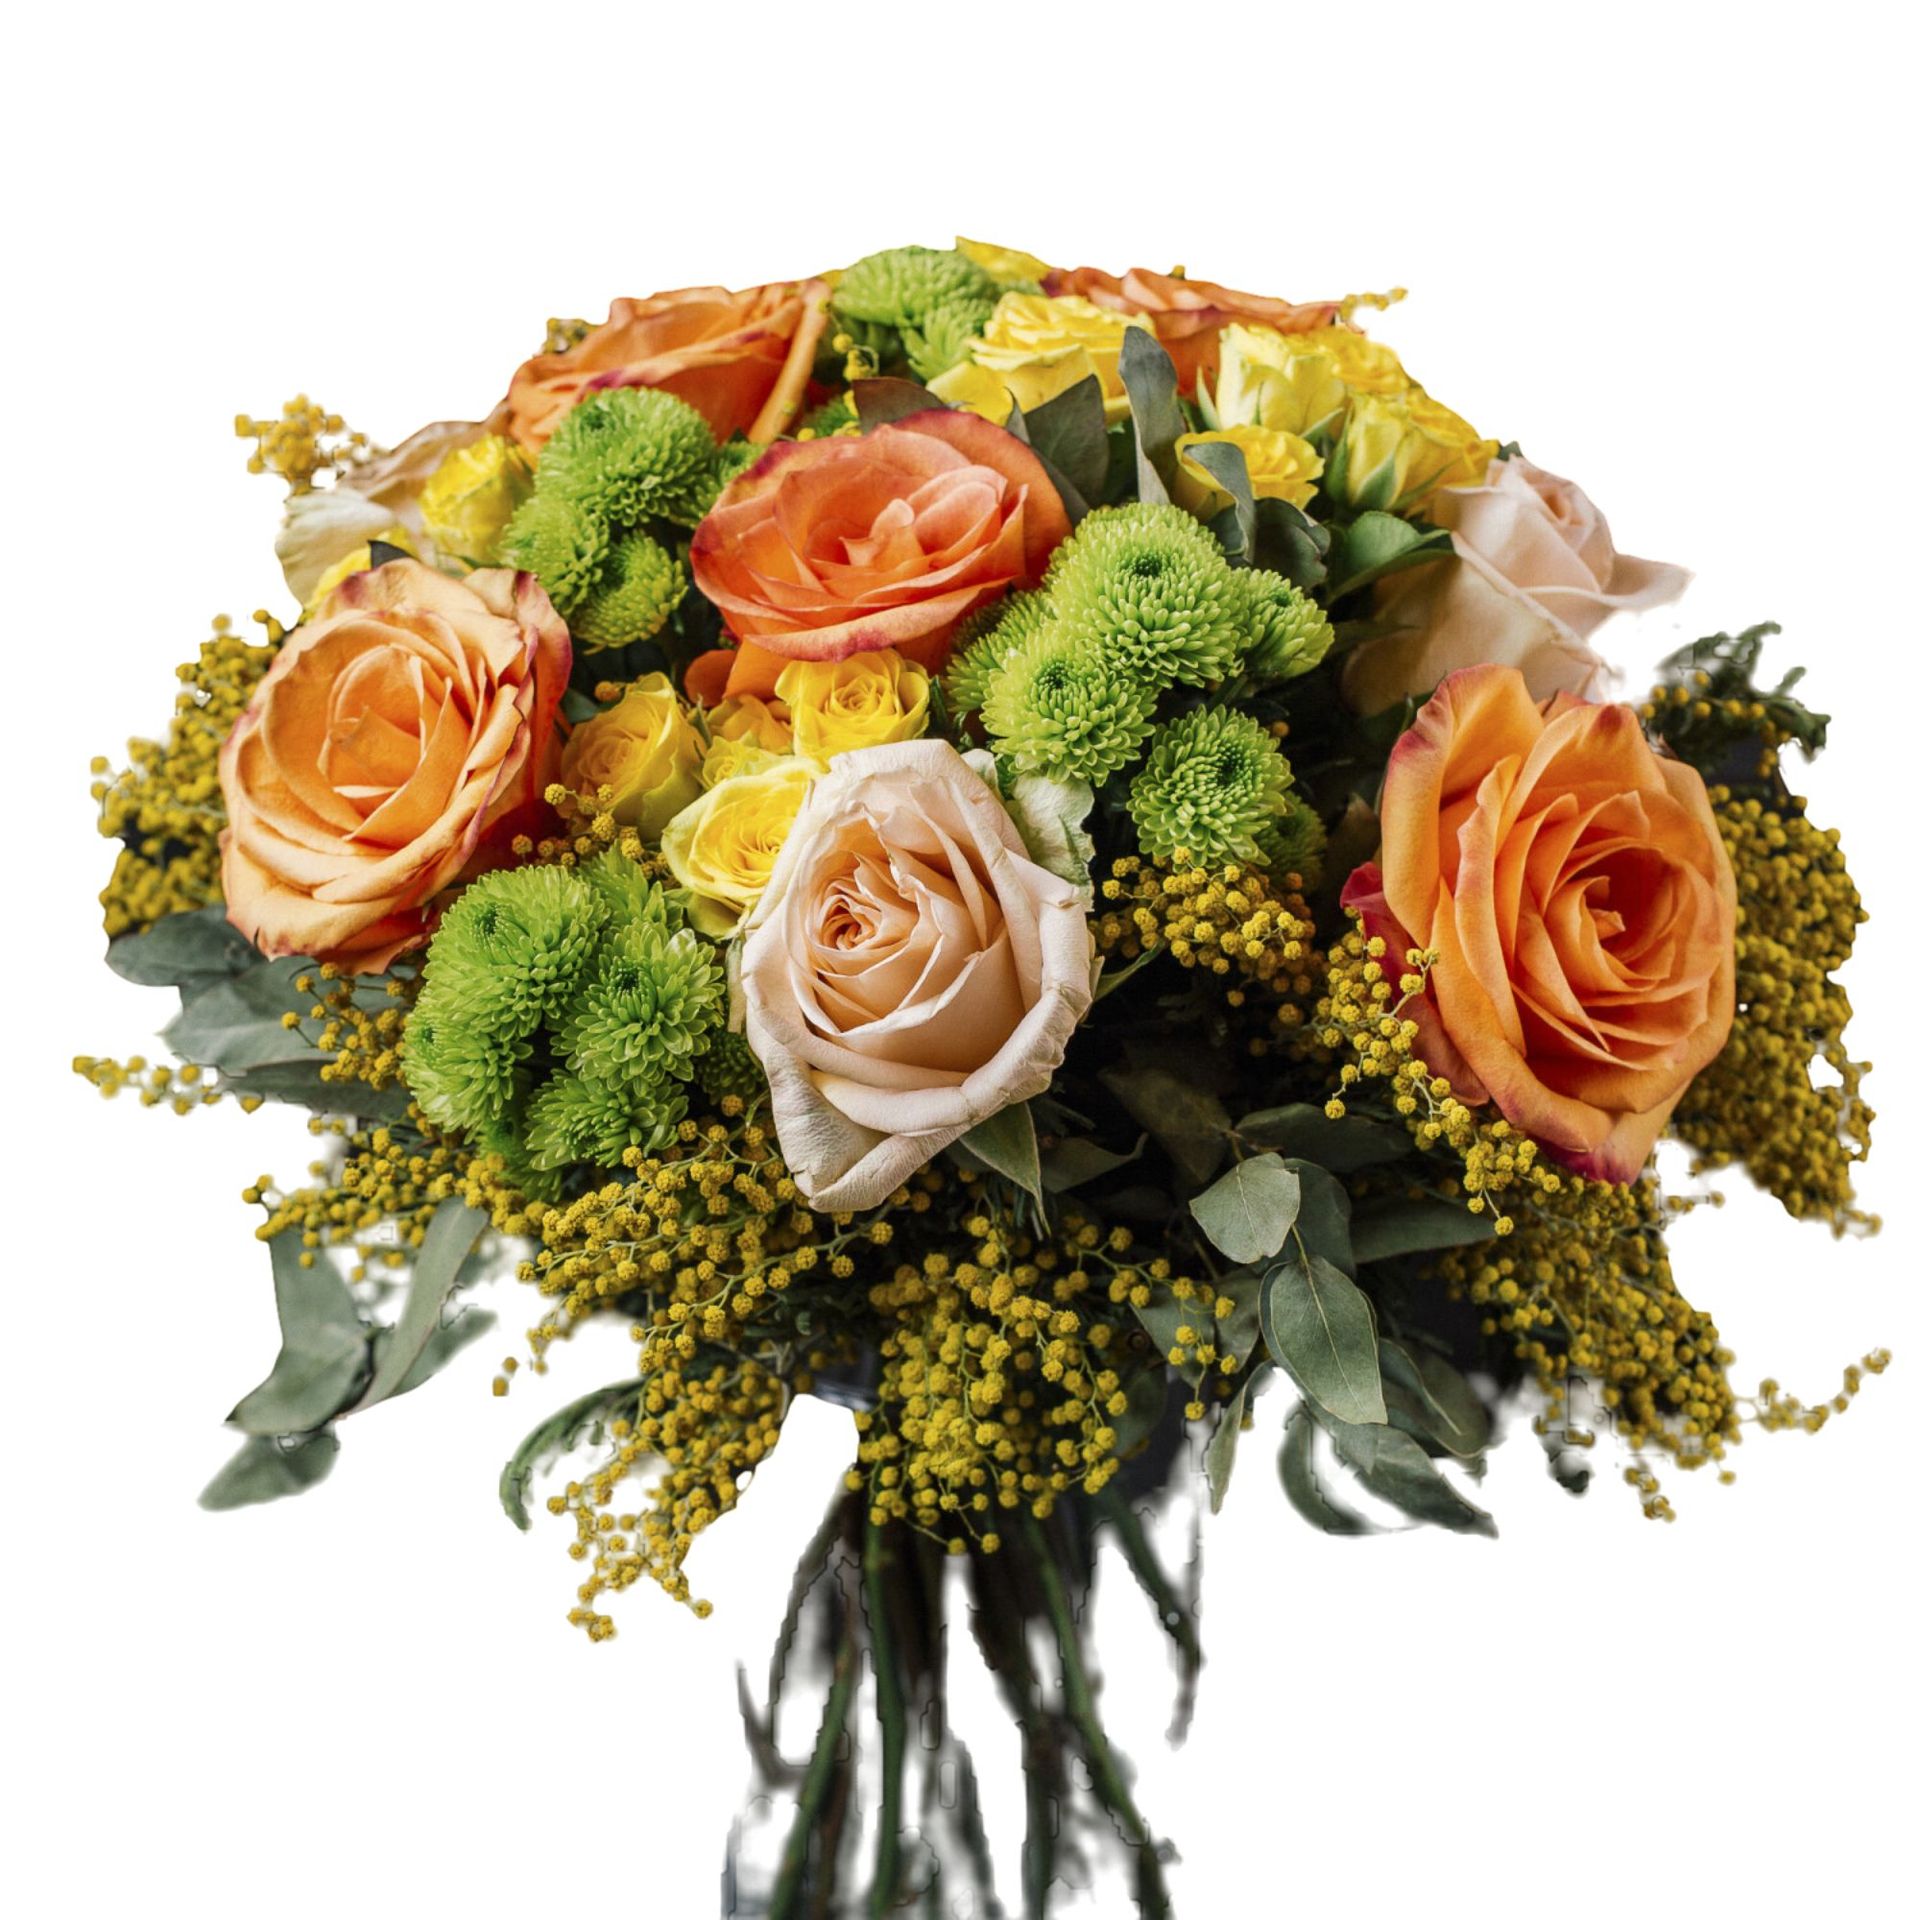 a bouquet of orange and yellow roses and green flowers